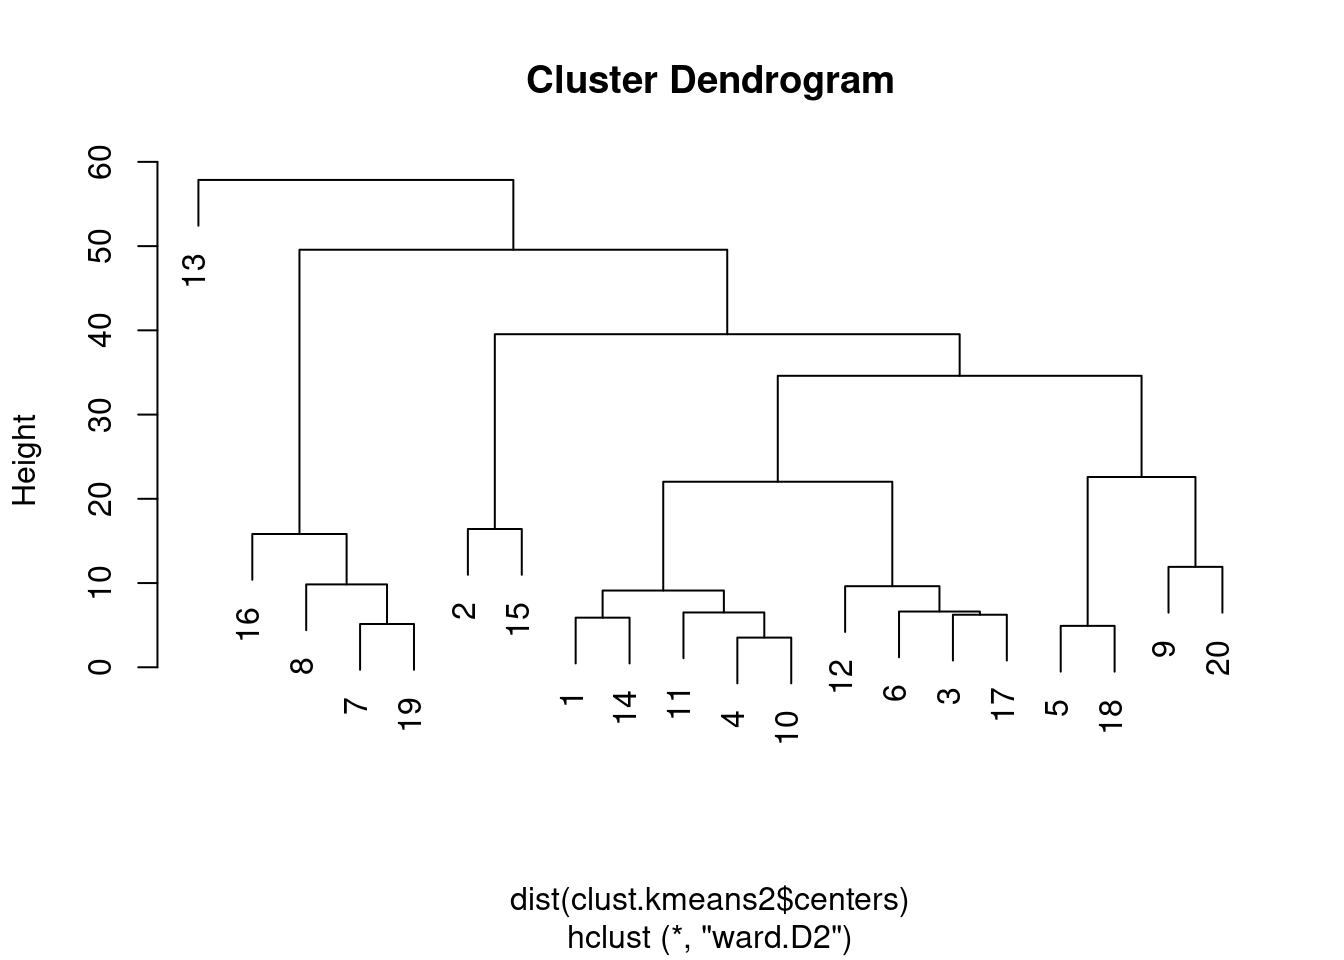 Hierarchy of $k$-means cluster centroids, using Ward's minimum variance method.